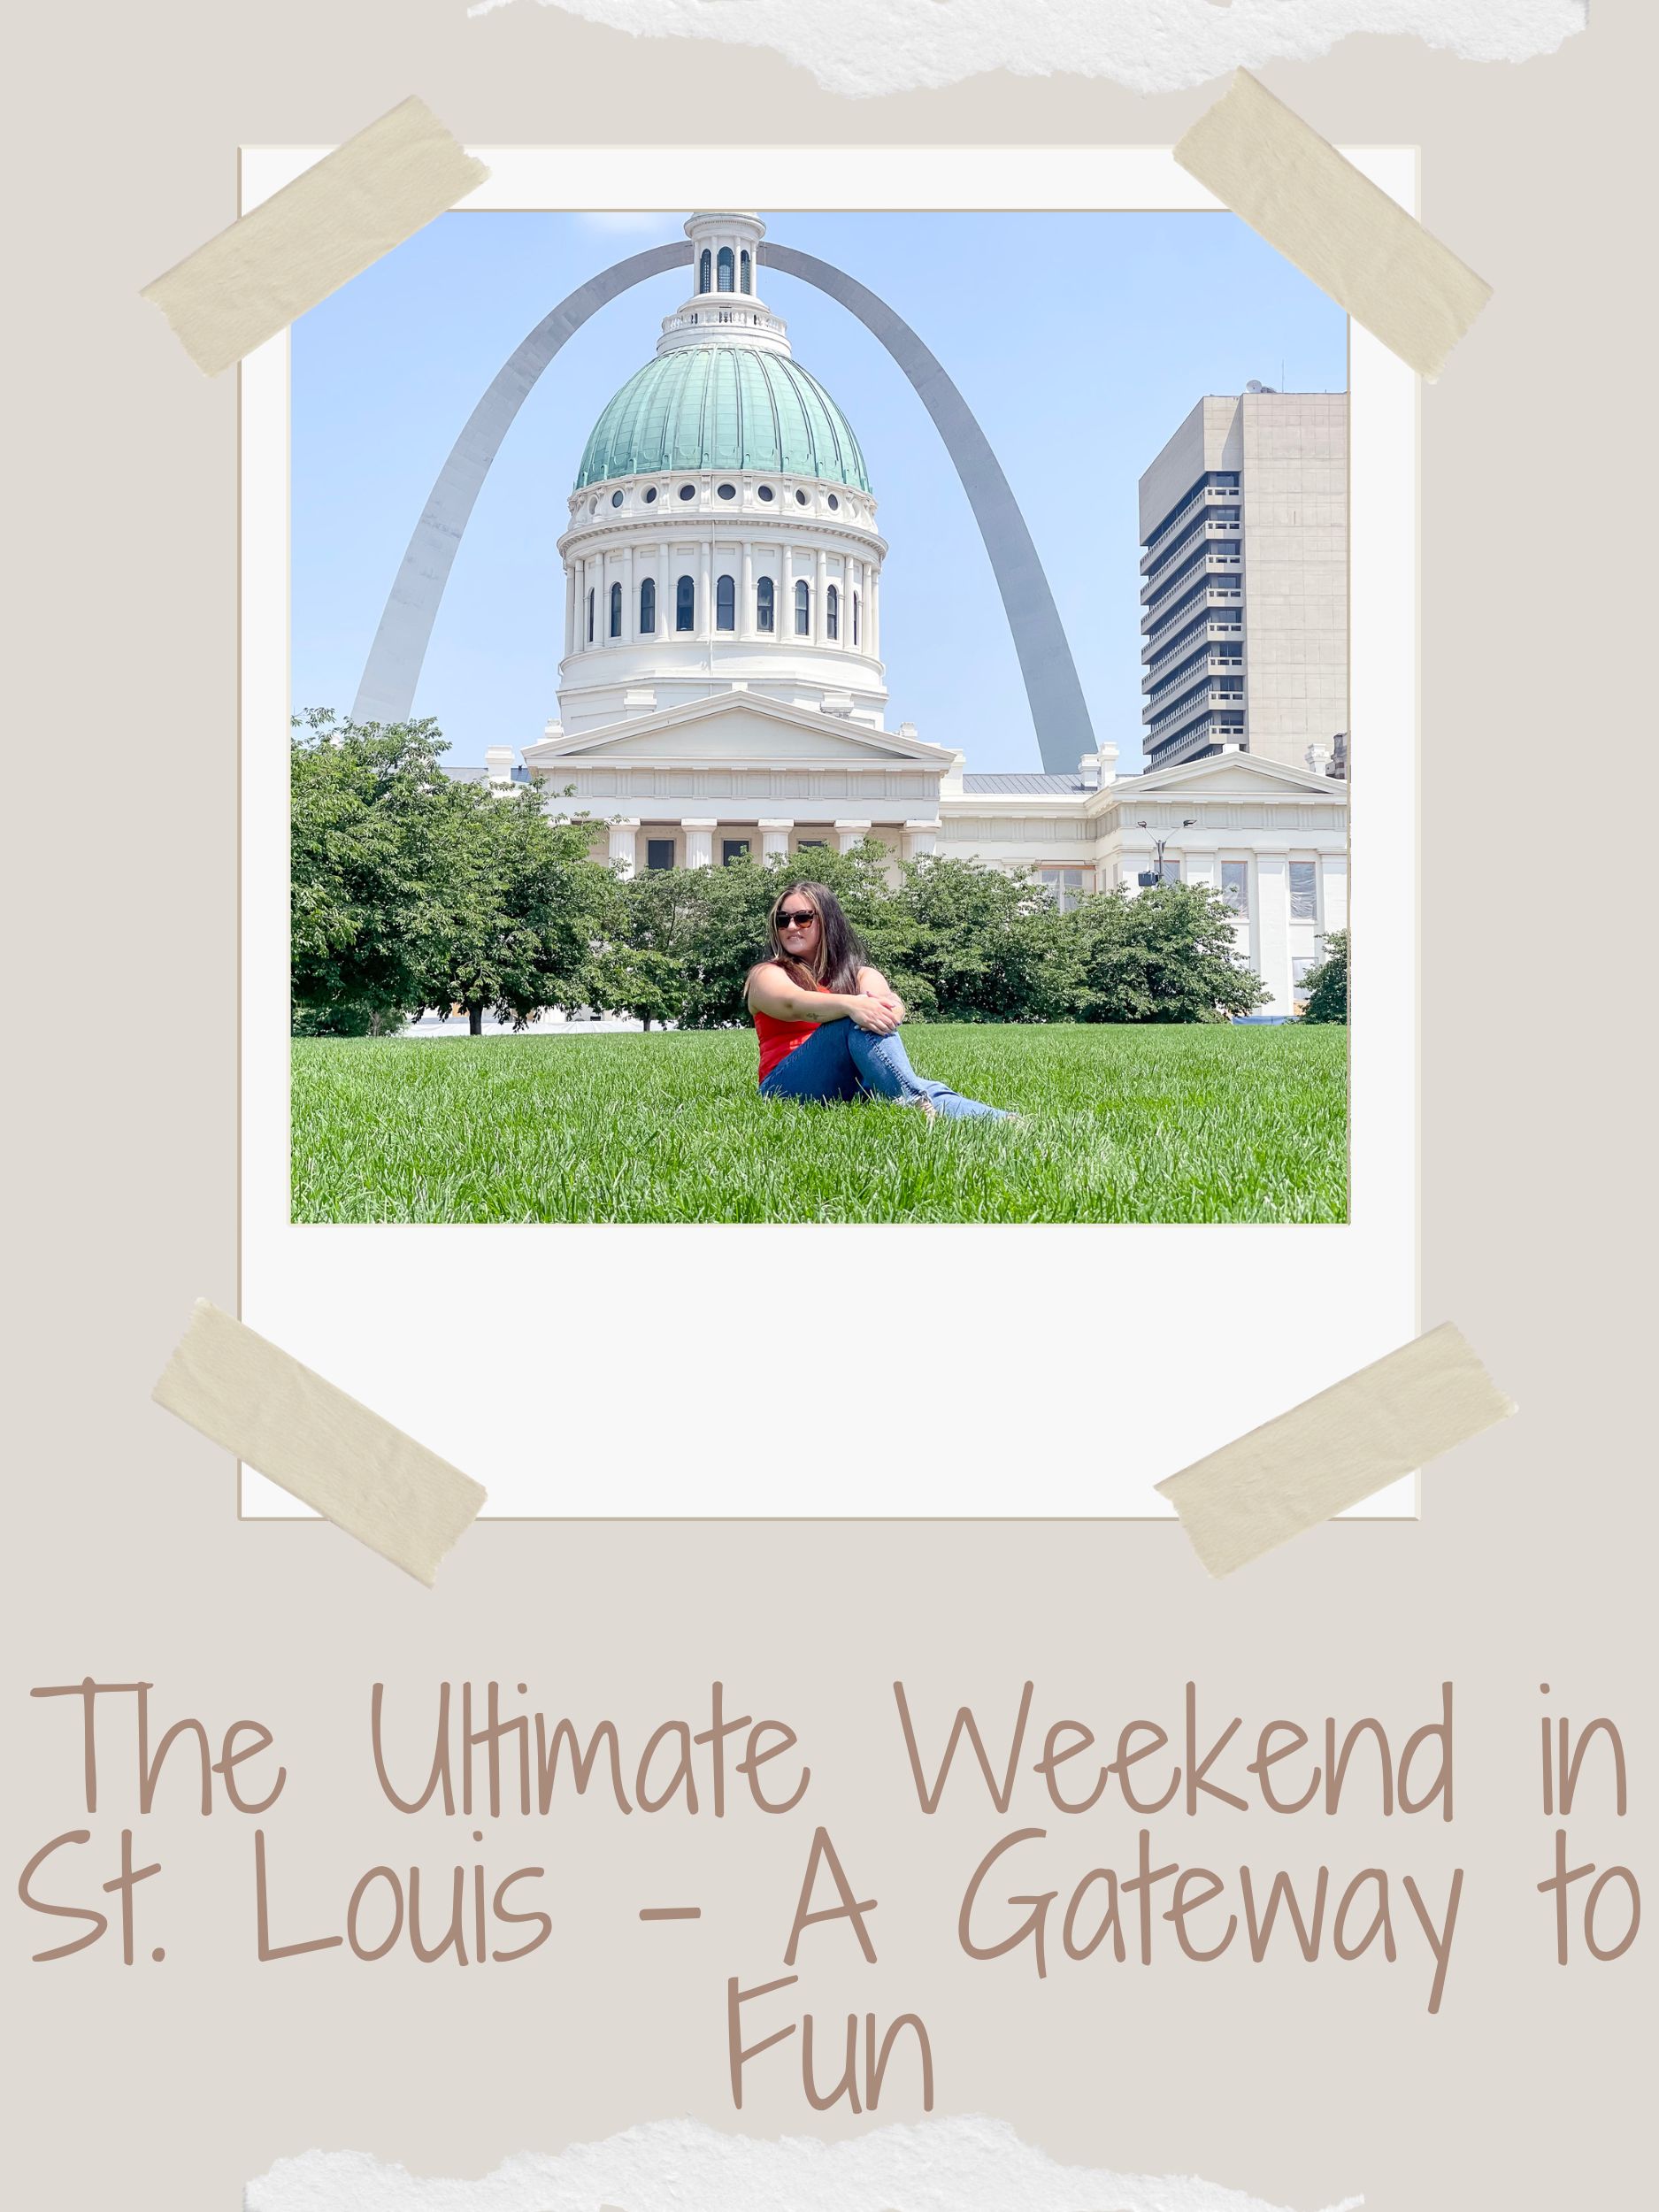 The Ultimate Weekend in St. Louis – A Gateway To Fun